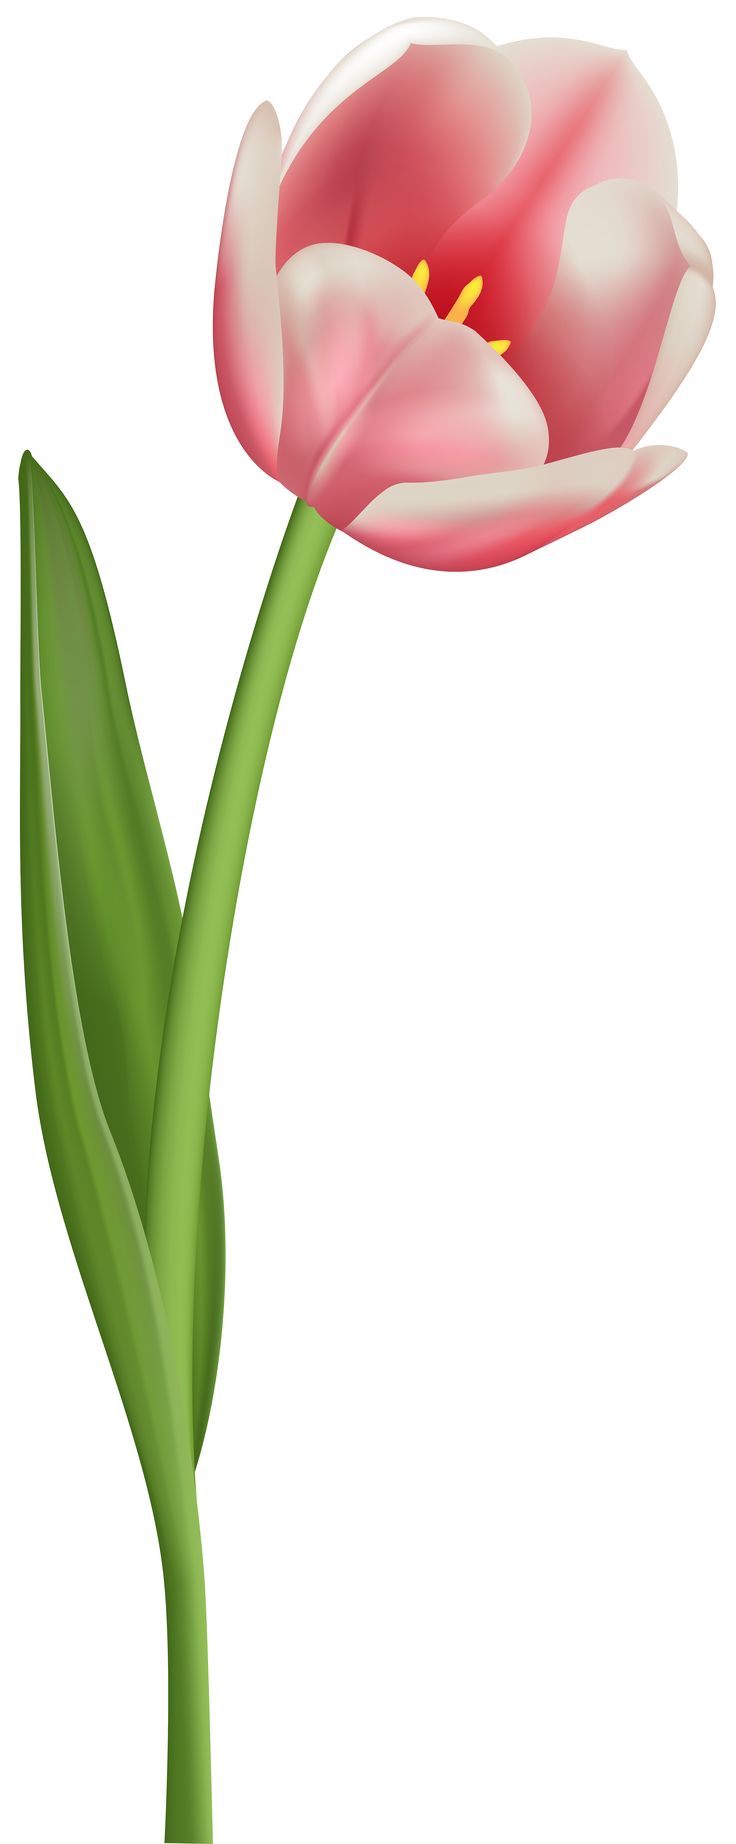 Flower with free download. Beautiful clipart transparent background